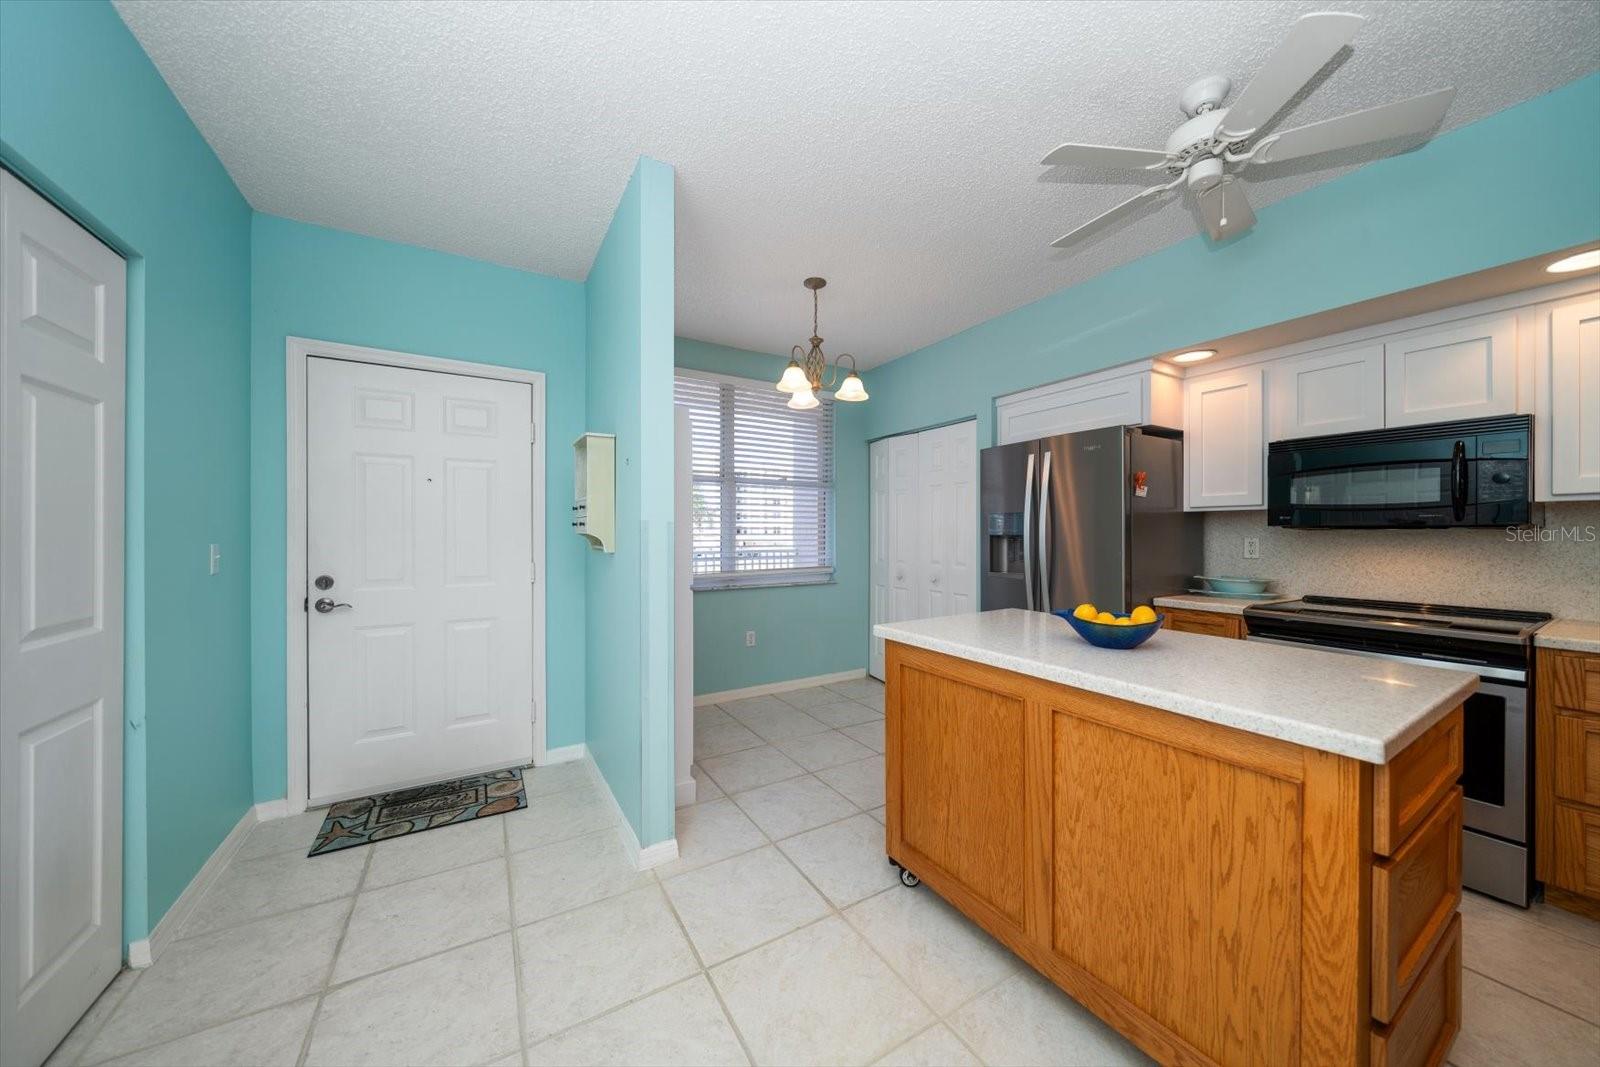 WELCOME IN! THE WASHER/DRYER IS IN CLOSET TO YOUR LEFT AND KITCHEN WITH A SMALL DINING AREA TO YOUR RIGHT.